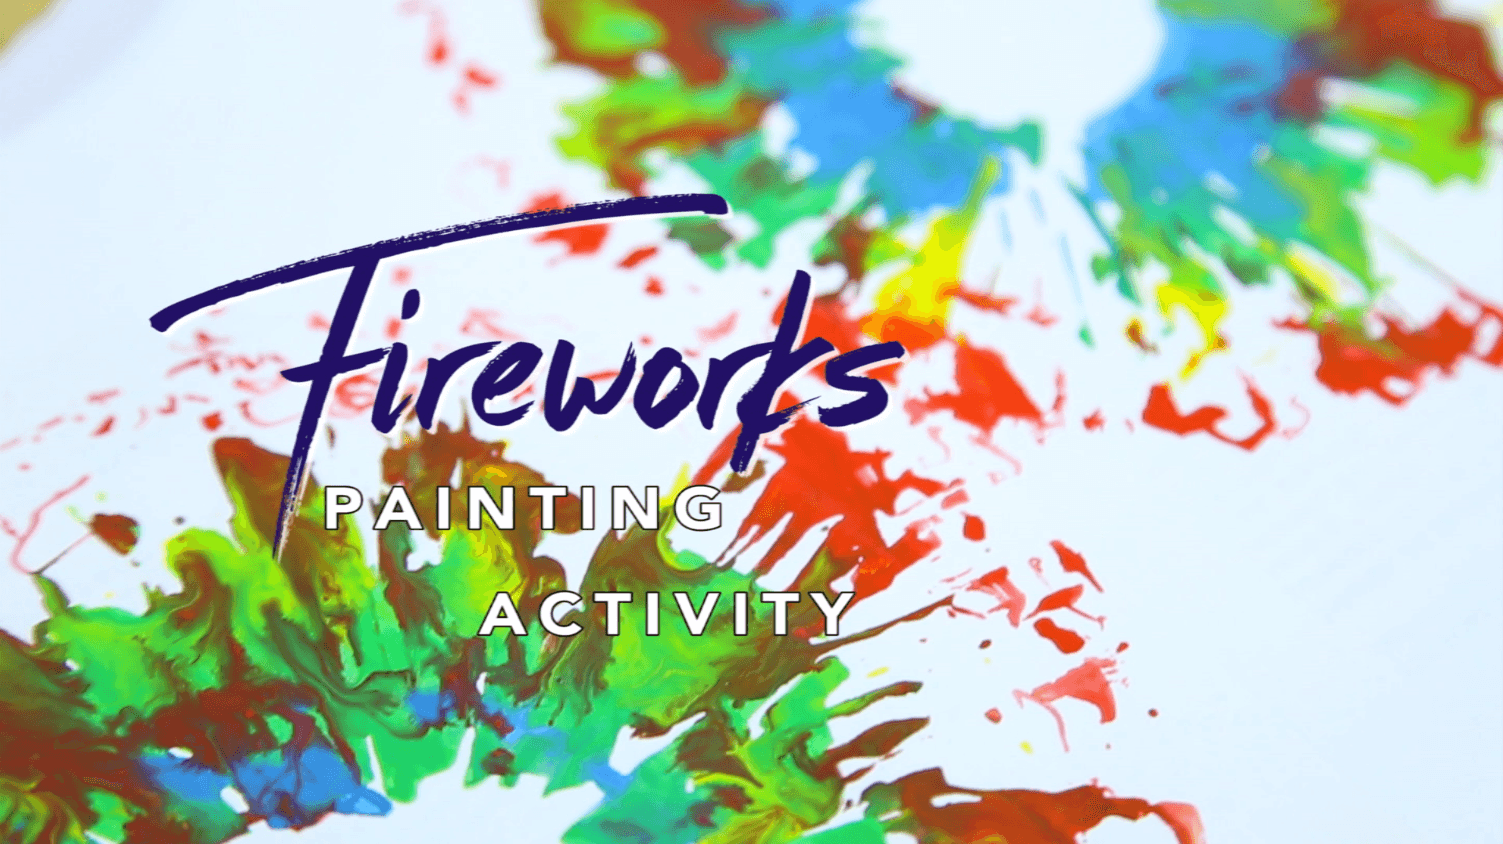 DIY Fireworks Painting Activity